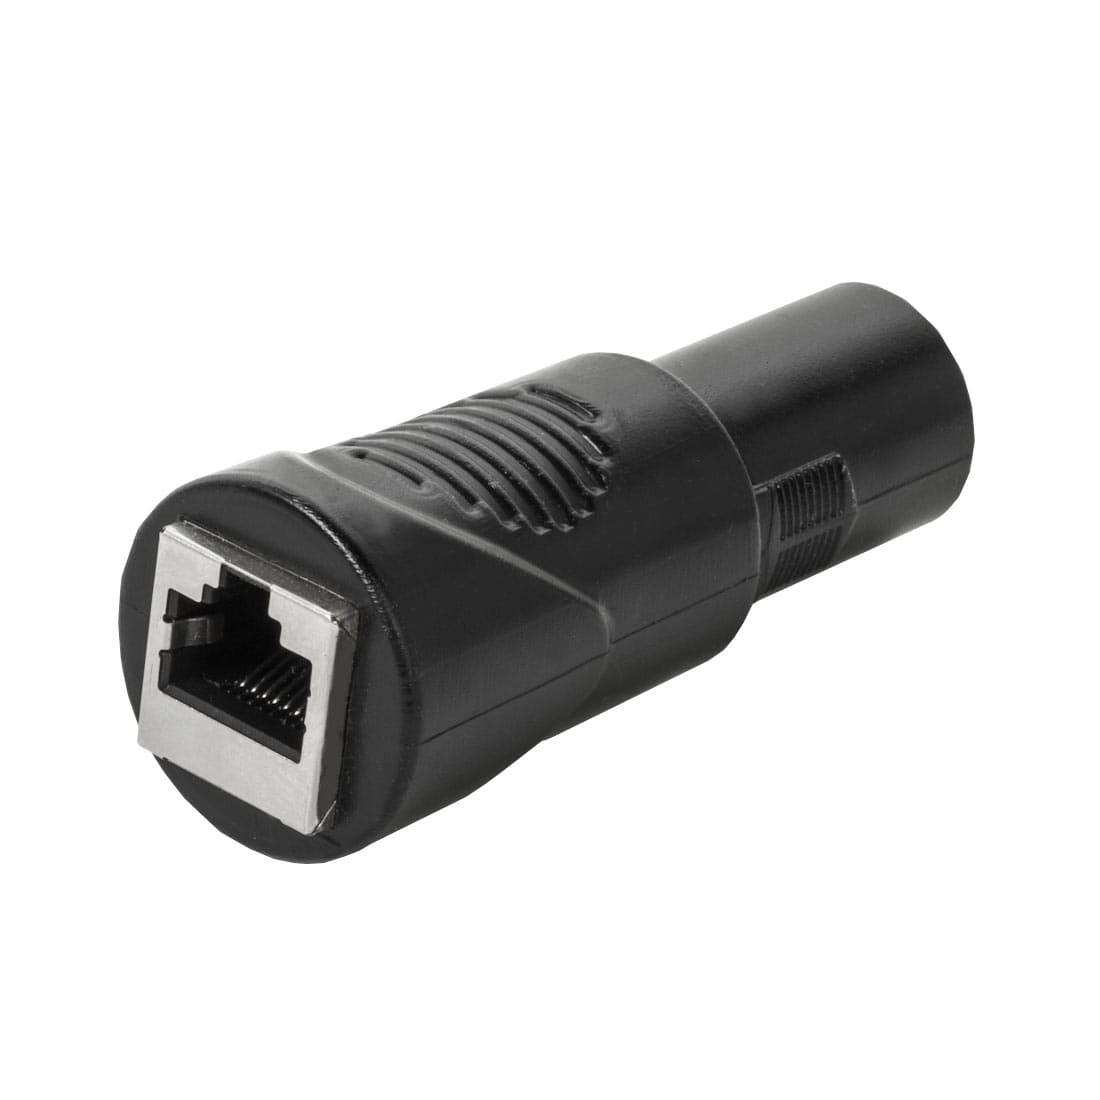 Adaptor from RJ45 to 5 pin XLR male